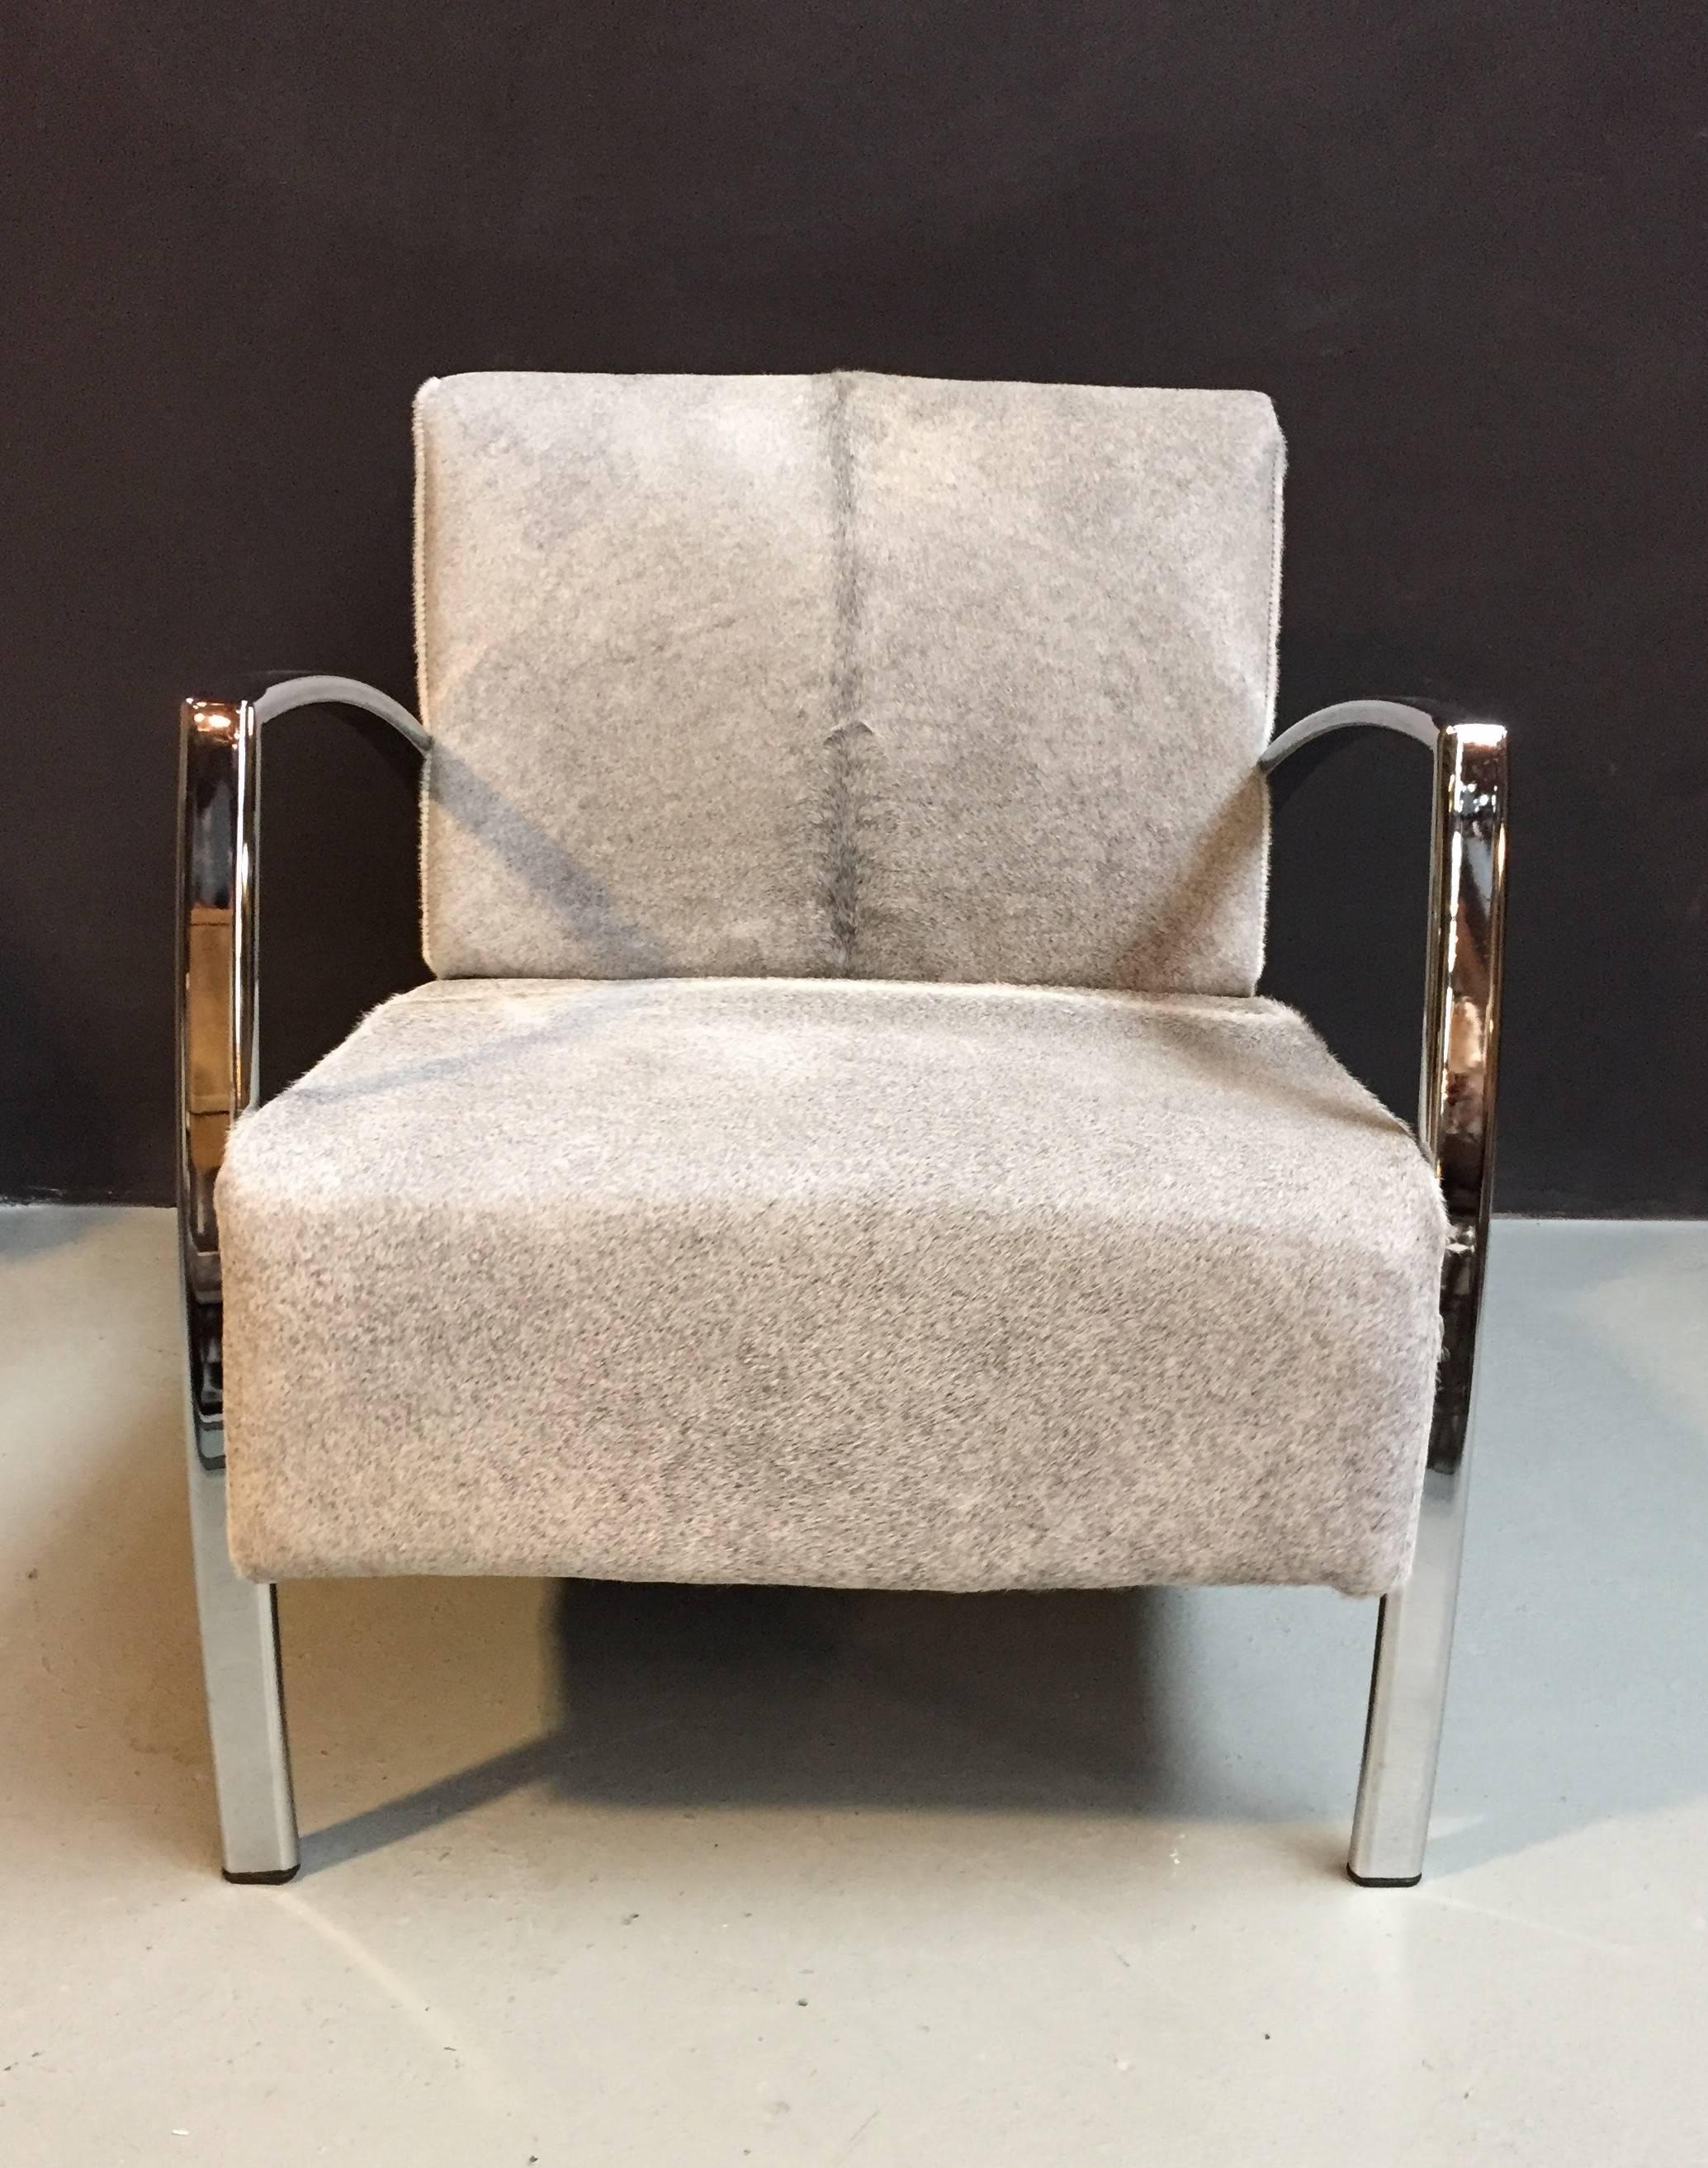 This chair has a grey cowhide upholstery with chromed arm rests and legs.
